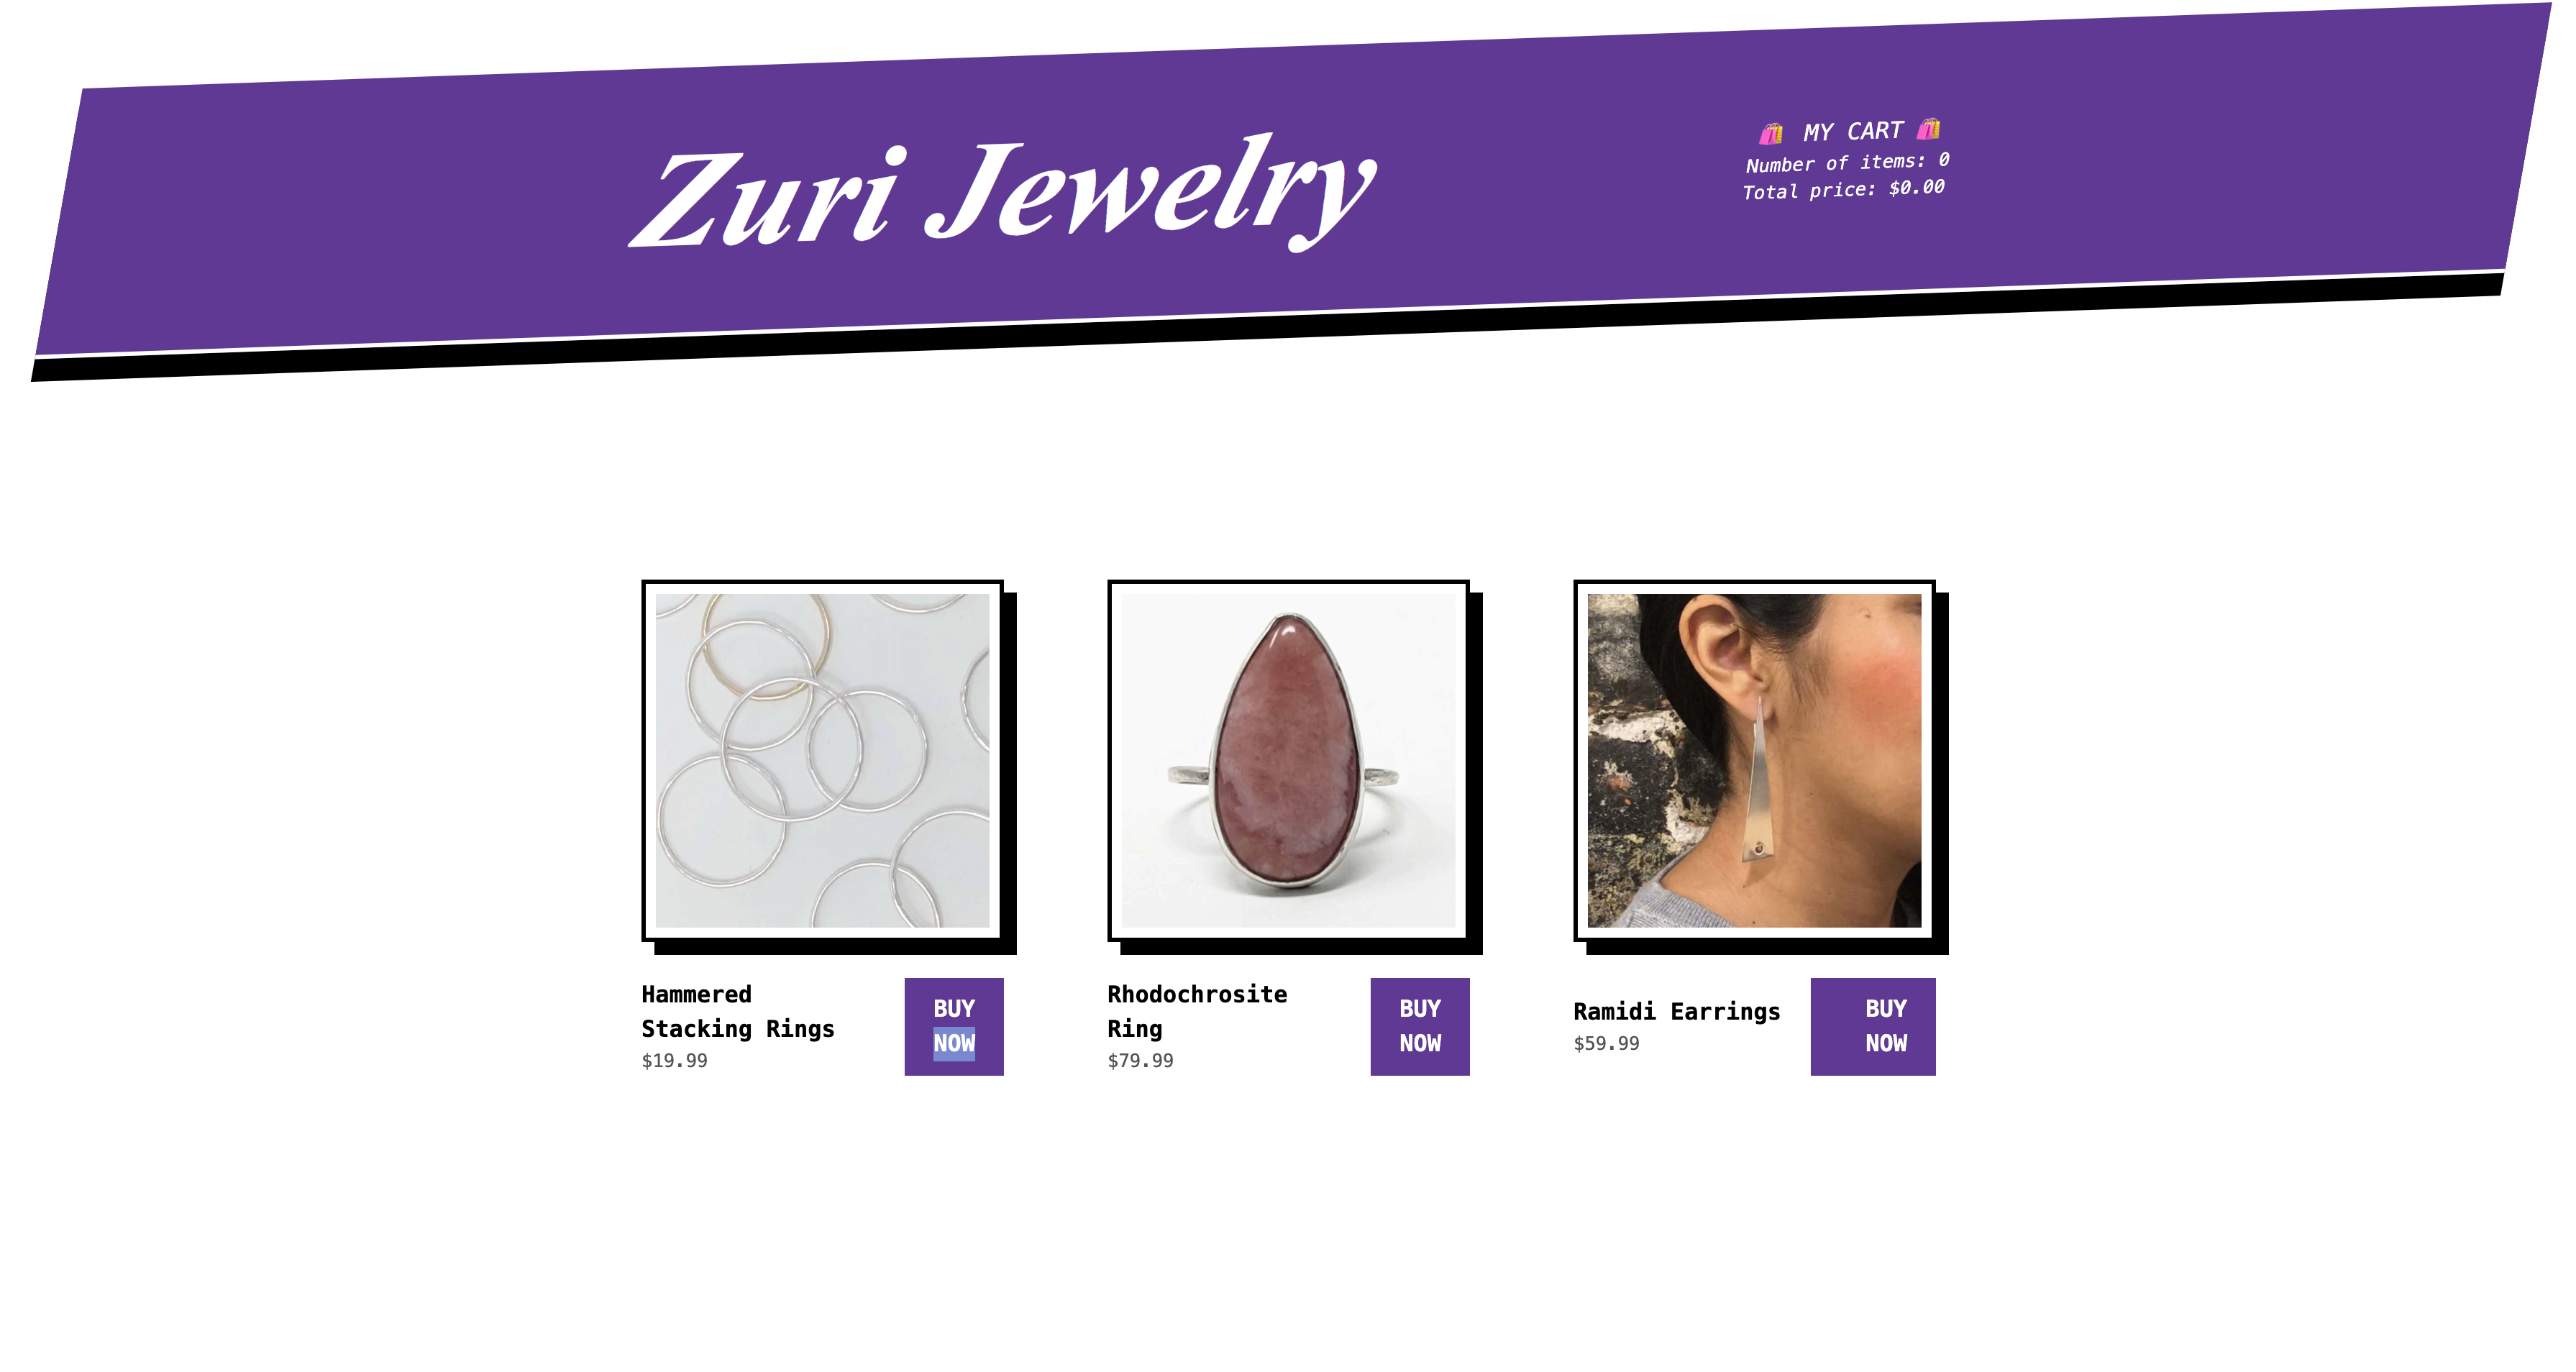 The sample site, now with a plain white background, jewelry products, and a plain white title reading Zuri Jewelry